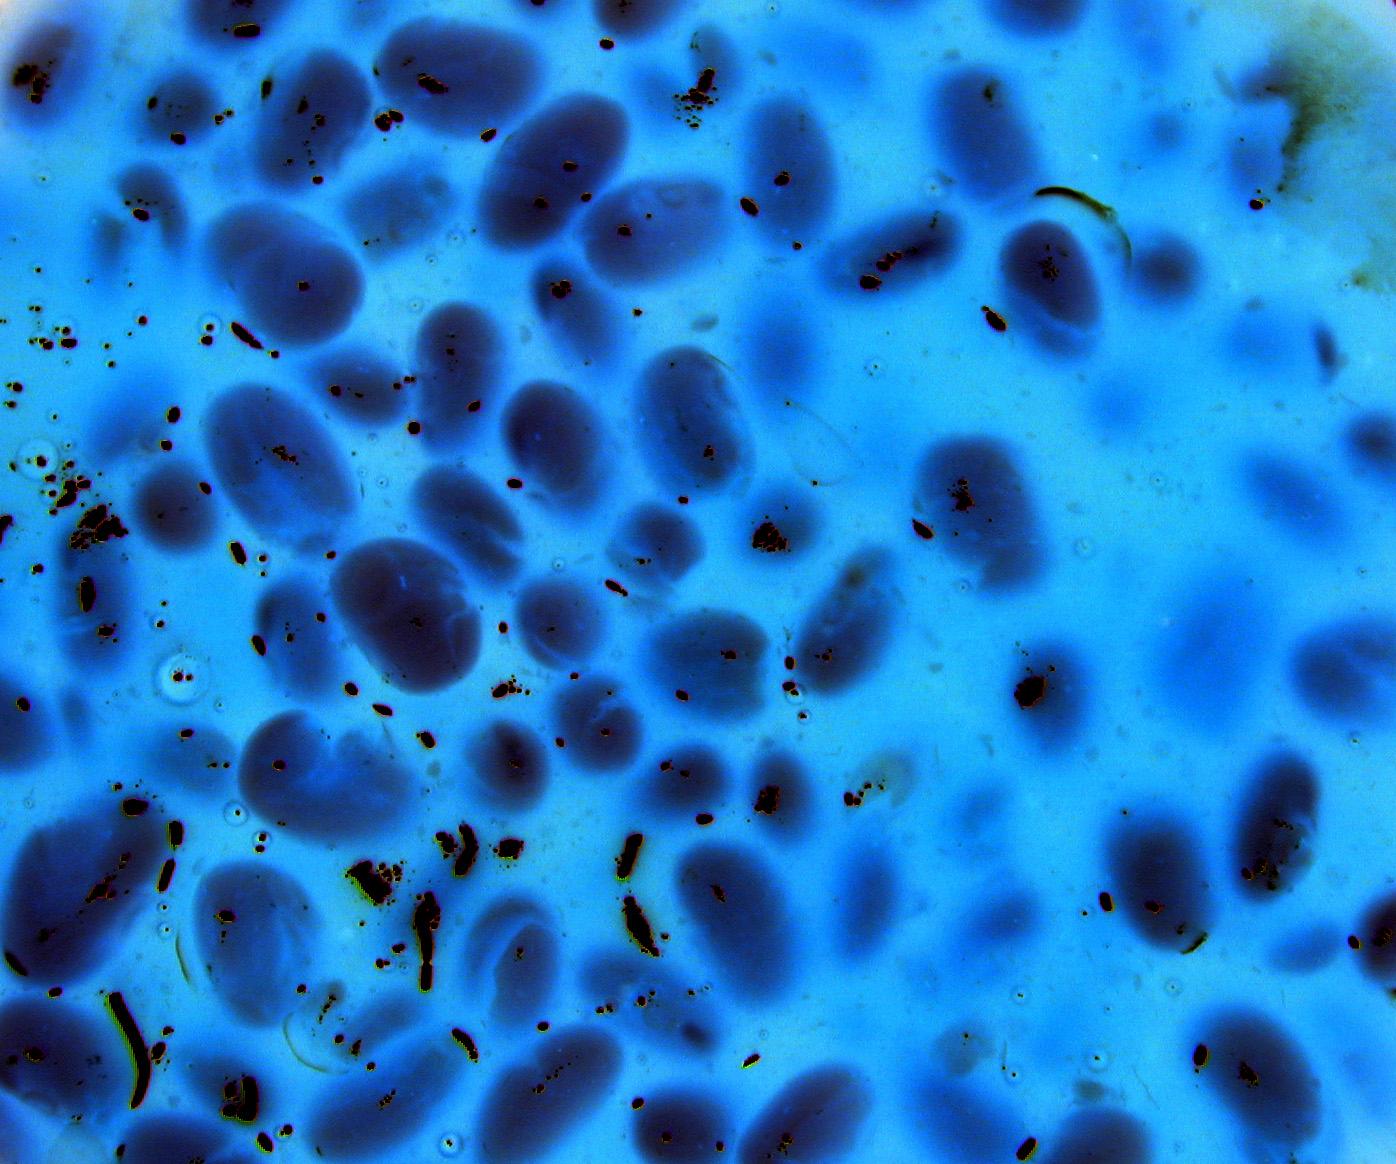 Magnification of a blue cell culture